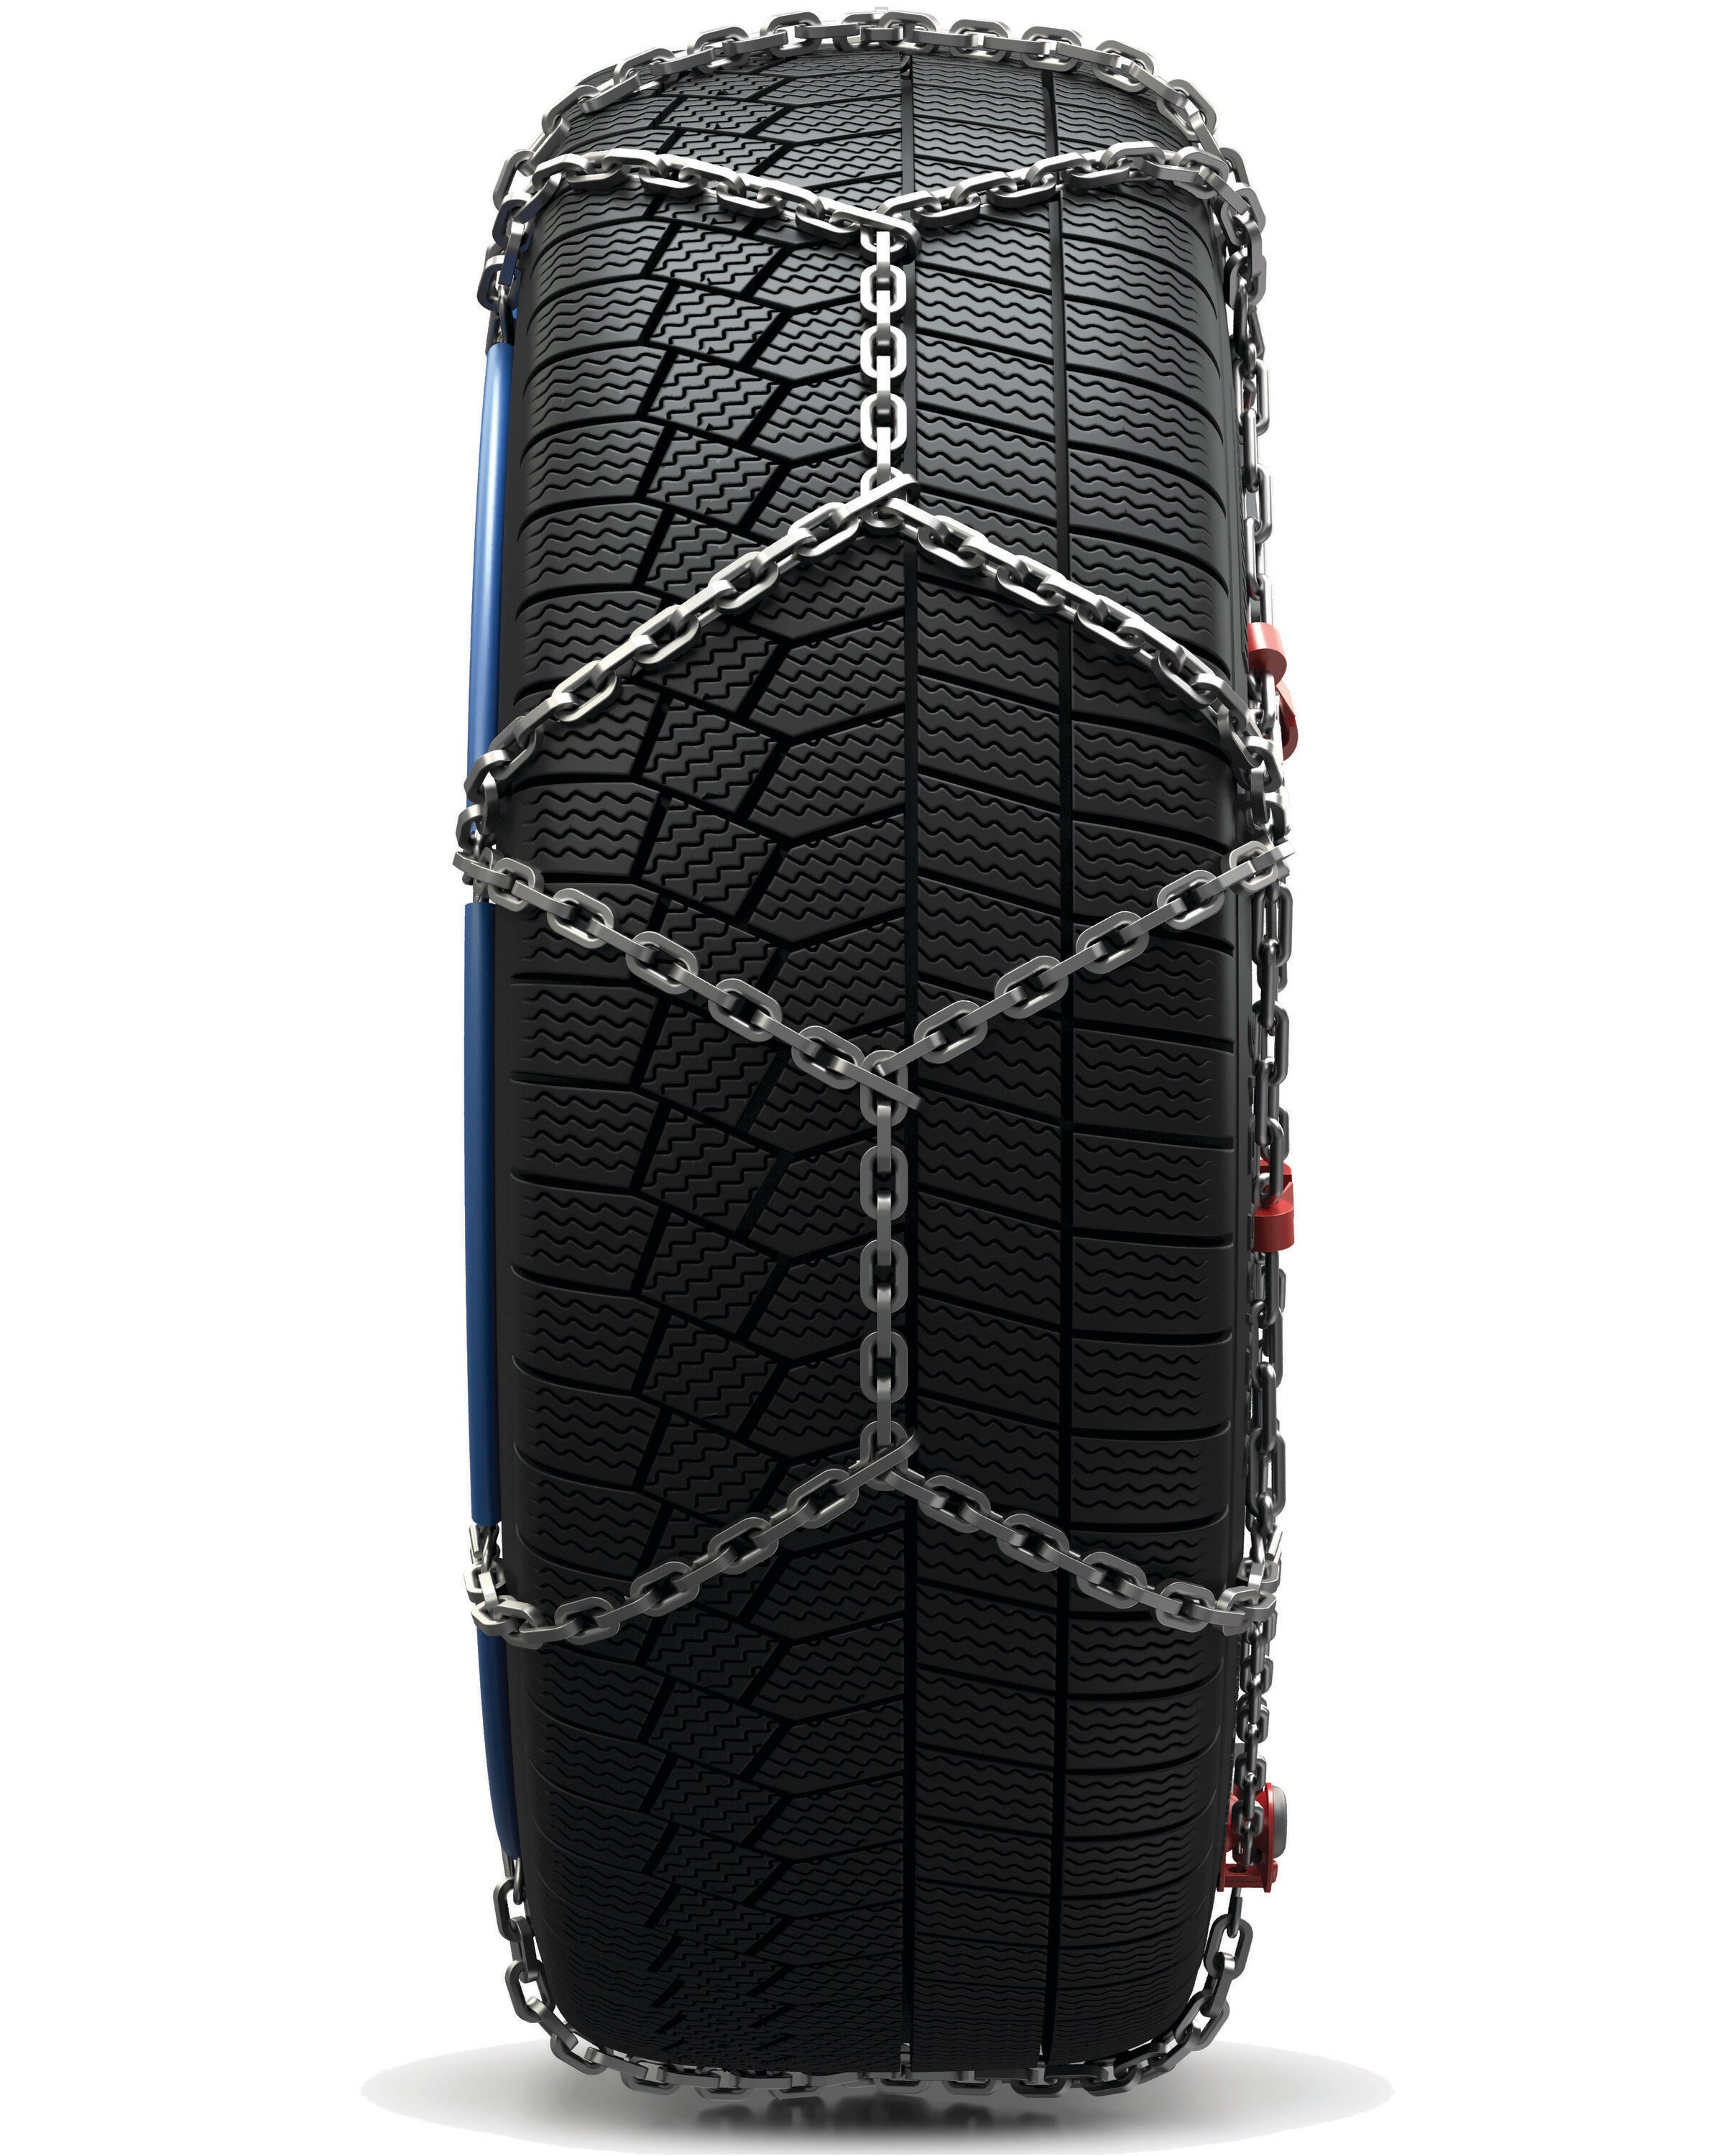 Konig Durable Steel Tire Chains for Vans and SUVs - Easy Manual 